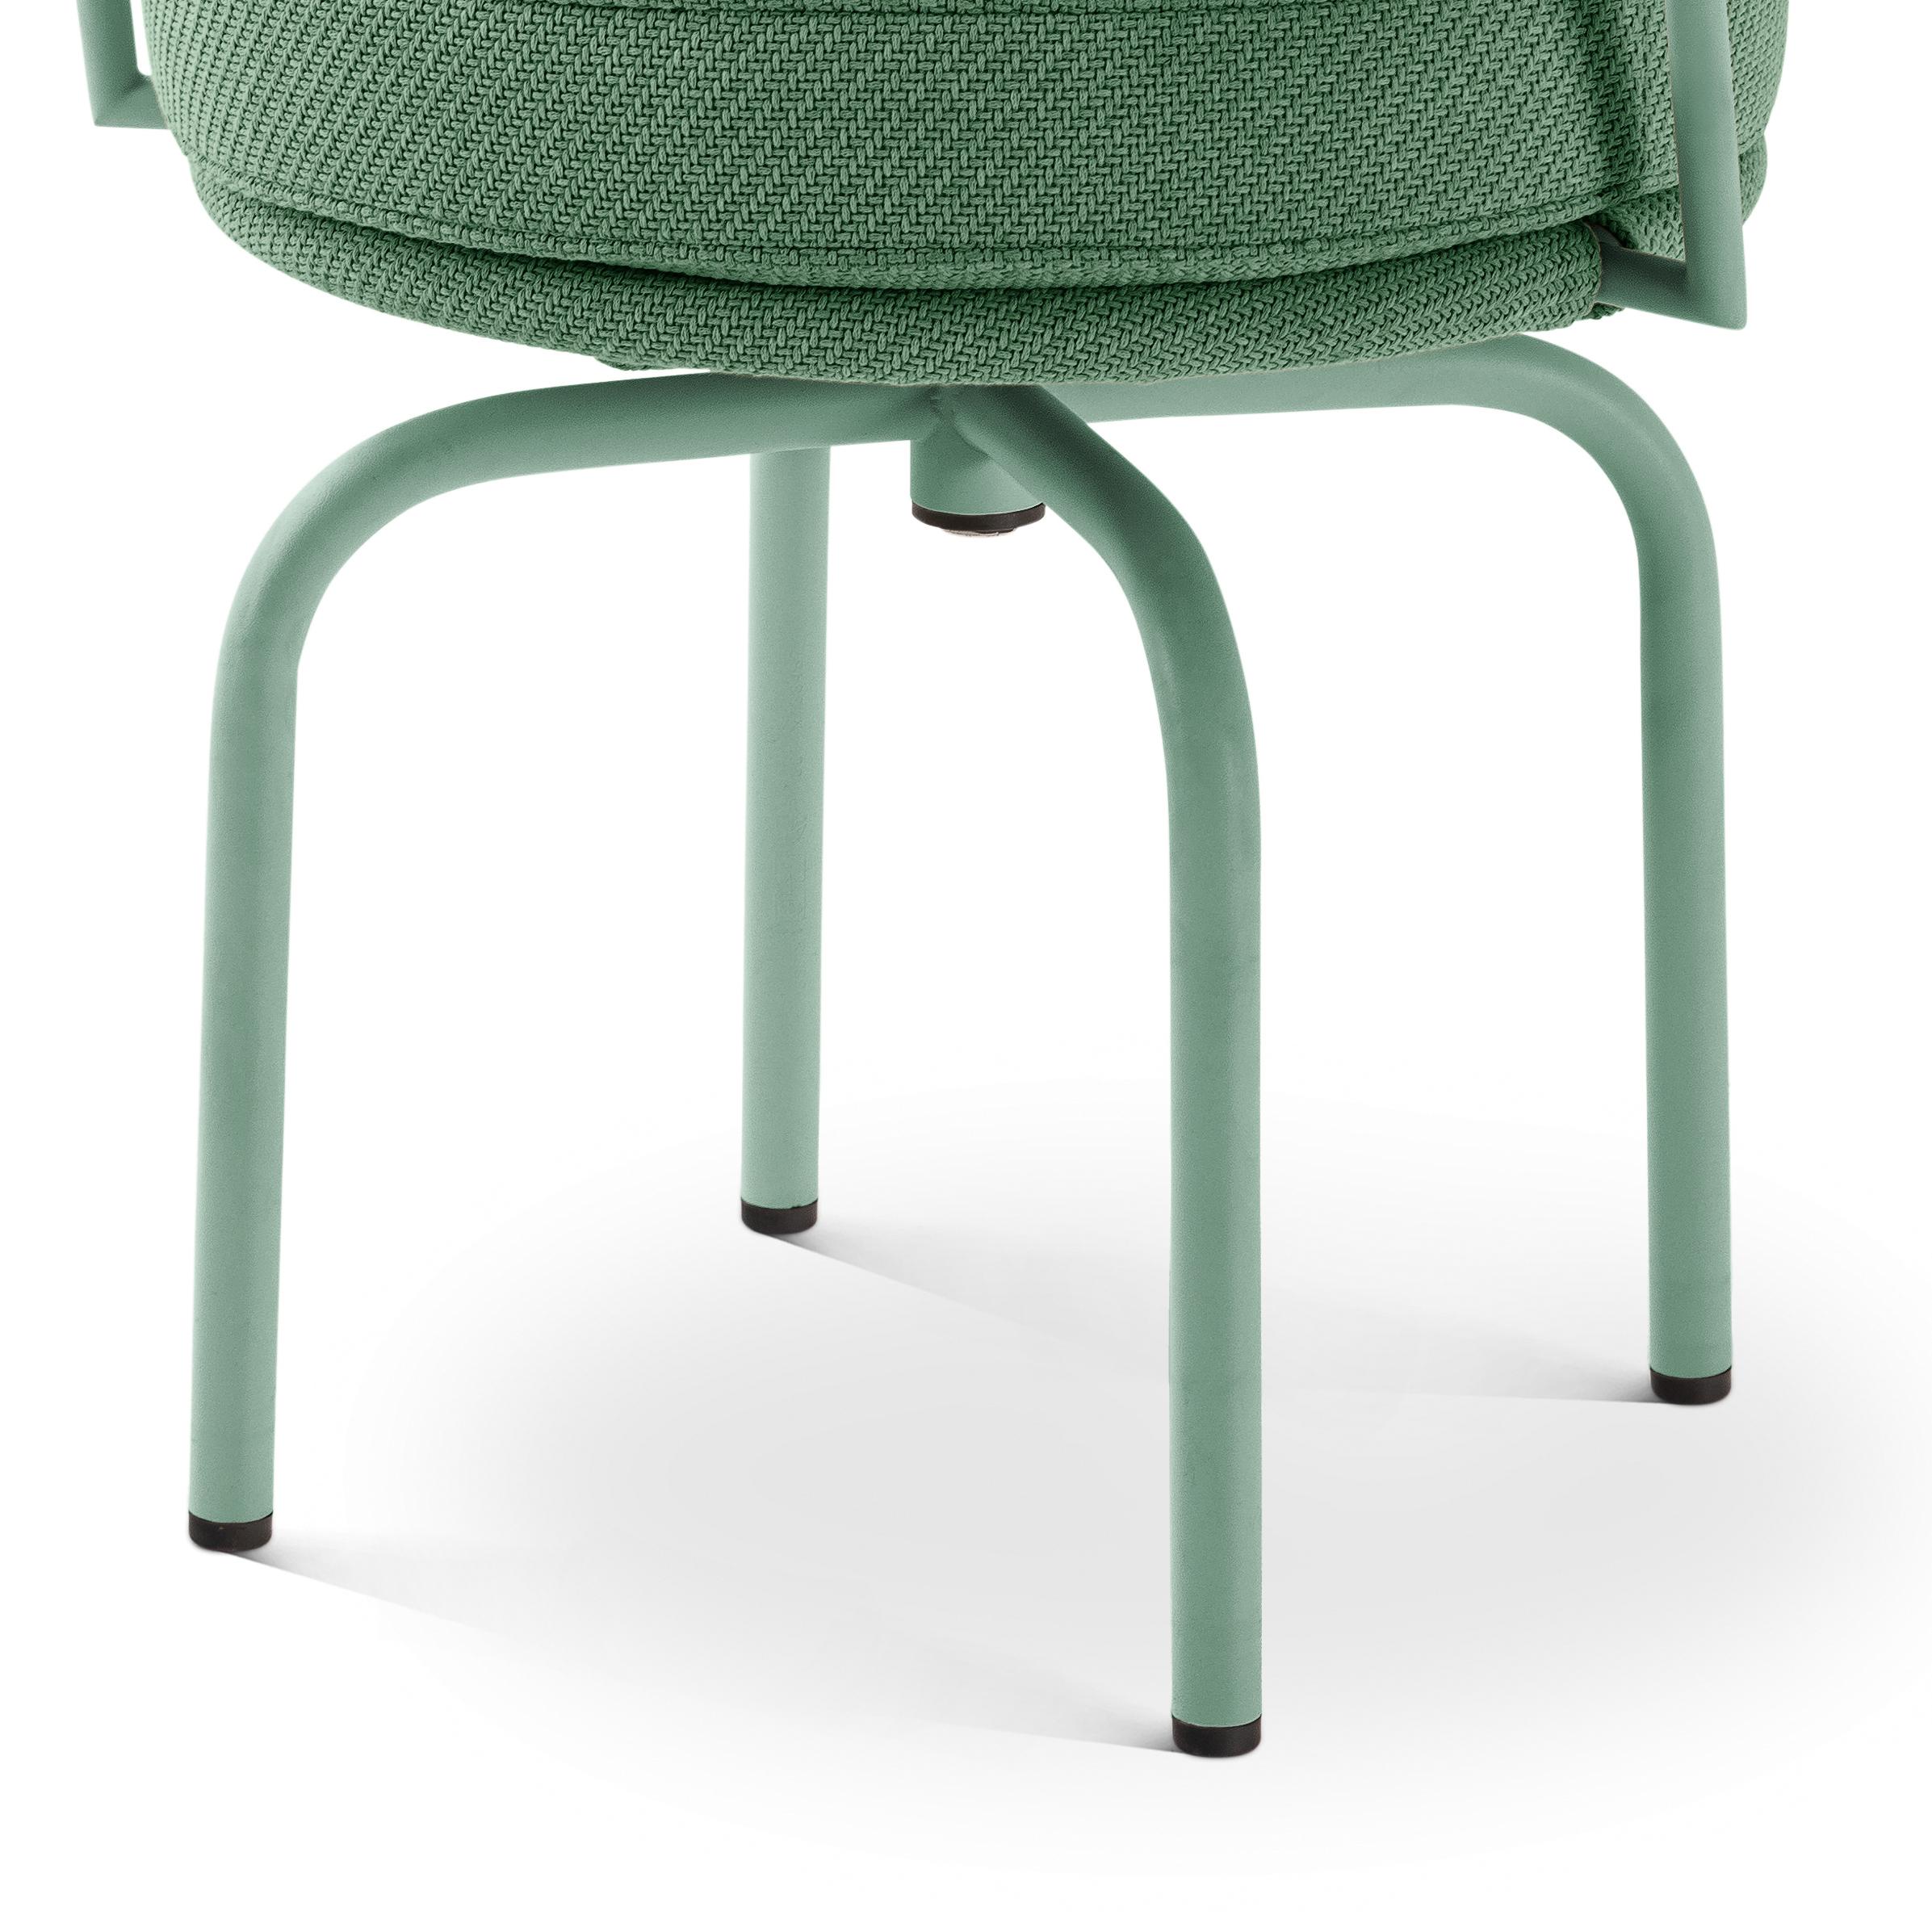 Outdoors green LC7 chair designed by Charlotte Perriand in 1927. Relaunched in 1978.
Manufactured by Cassina in Italy.

Designed by Charlotte Perriand and part of the LC collection by Le Corbusier, Pierre Jeanneret and Charlotte Perriand.

An